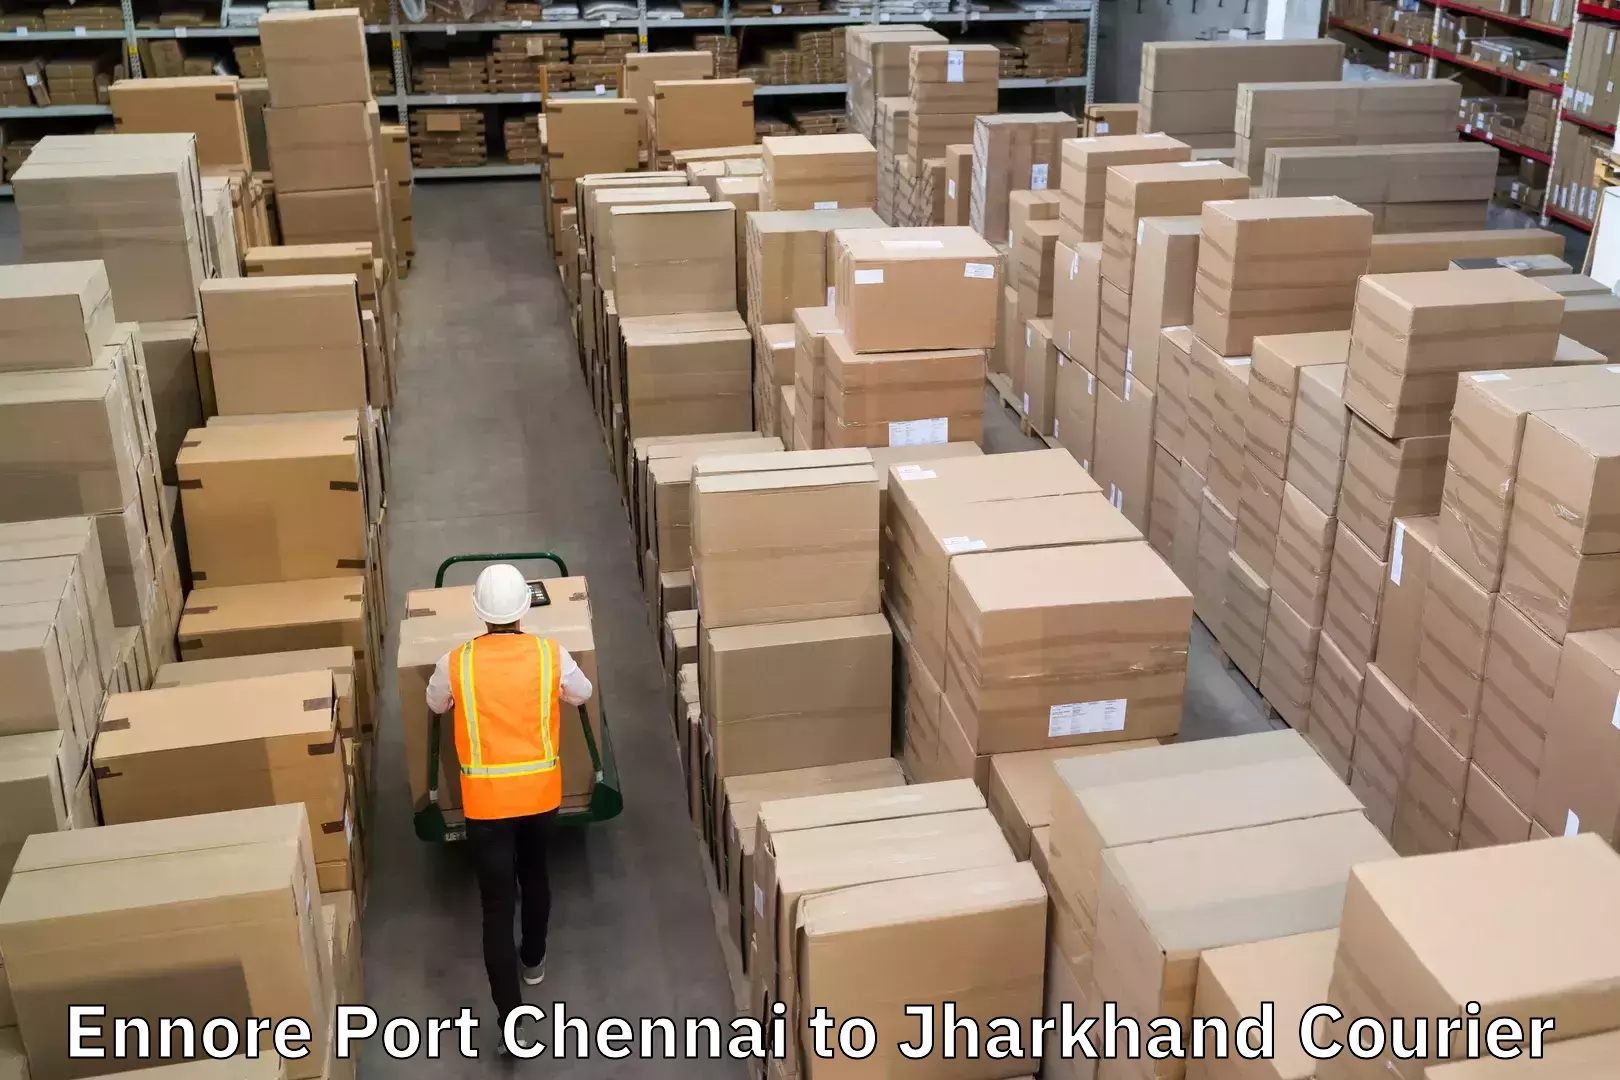 Long distance courier Ennore Port Chennai to Jharkhand